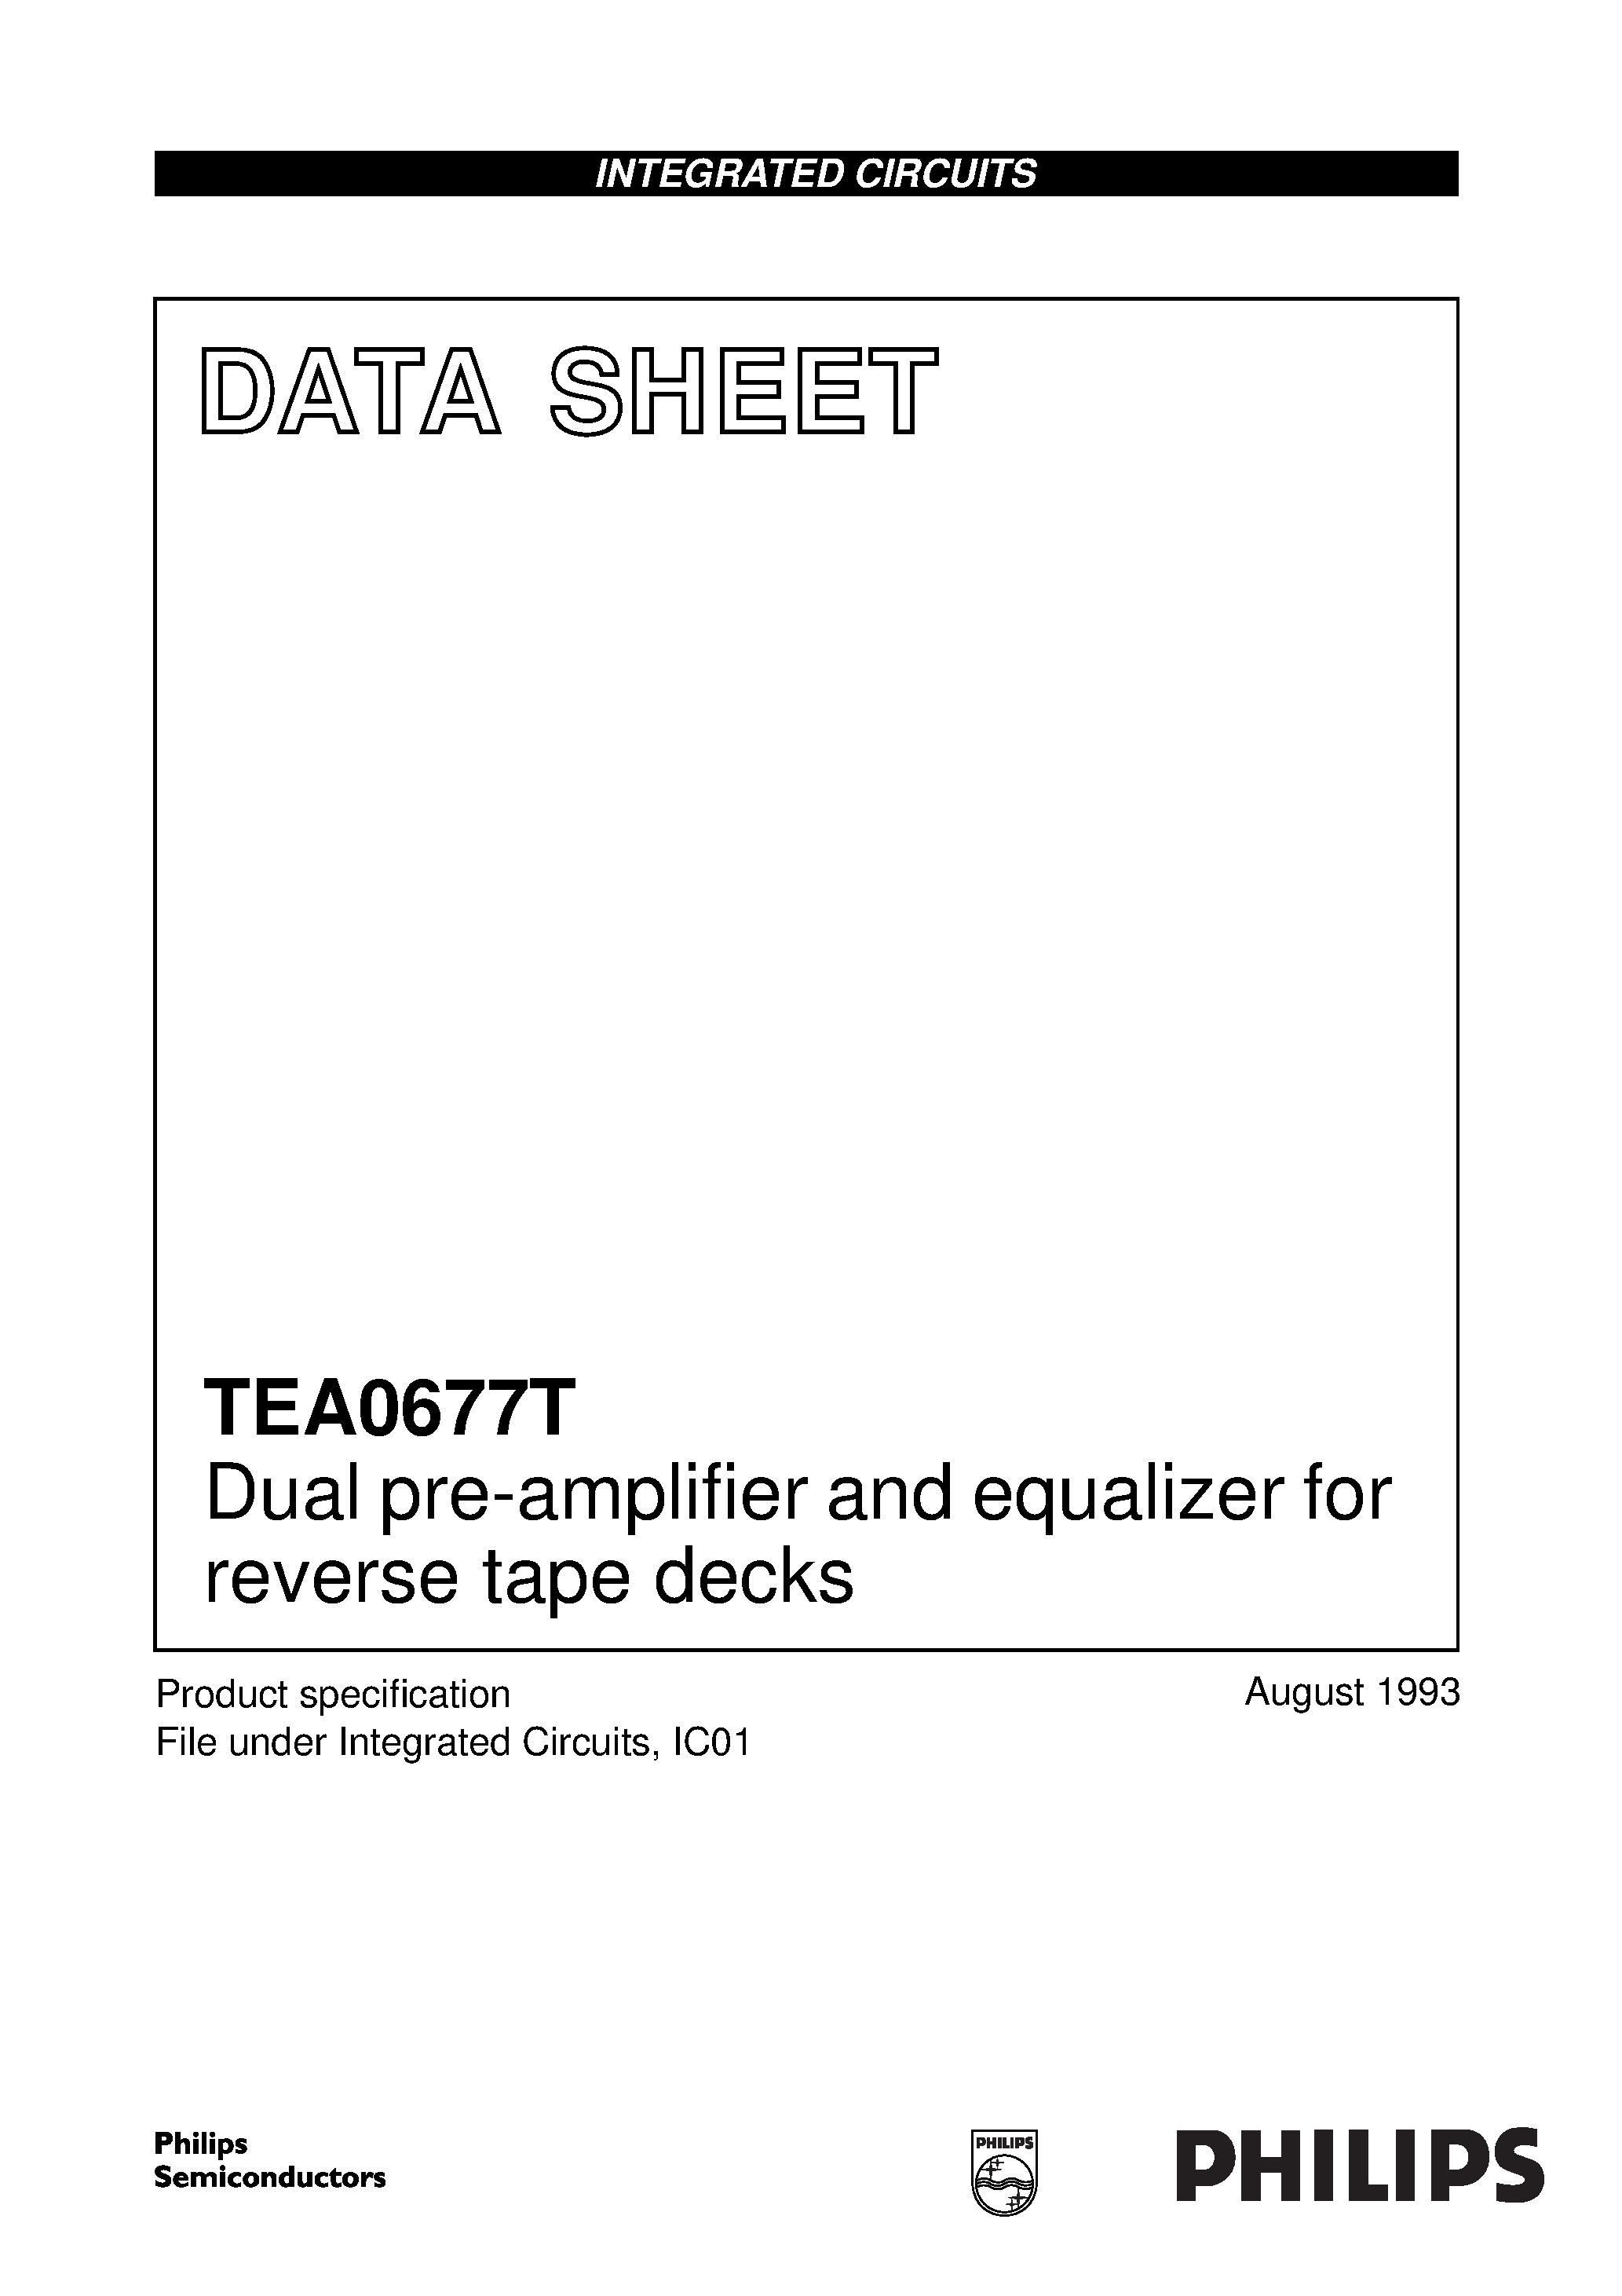 Datasheet TEA0677T - Dual pre-amplifier and equalizer for reverse tape decks page 1